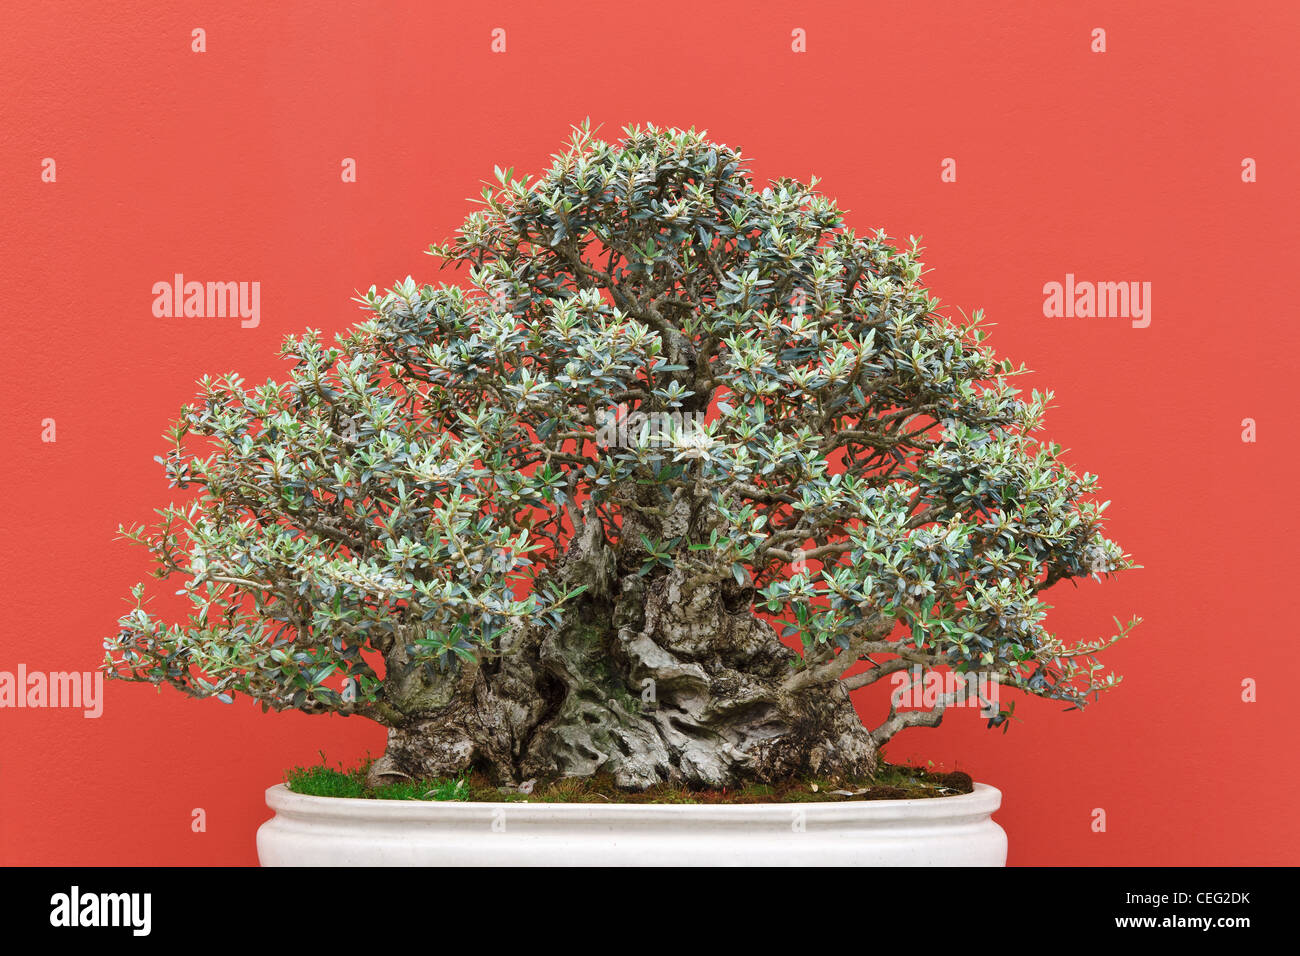 vary old bonsai tree over red background Stock Photo